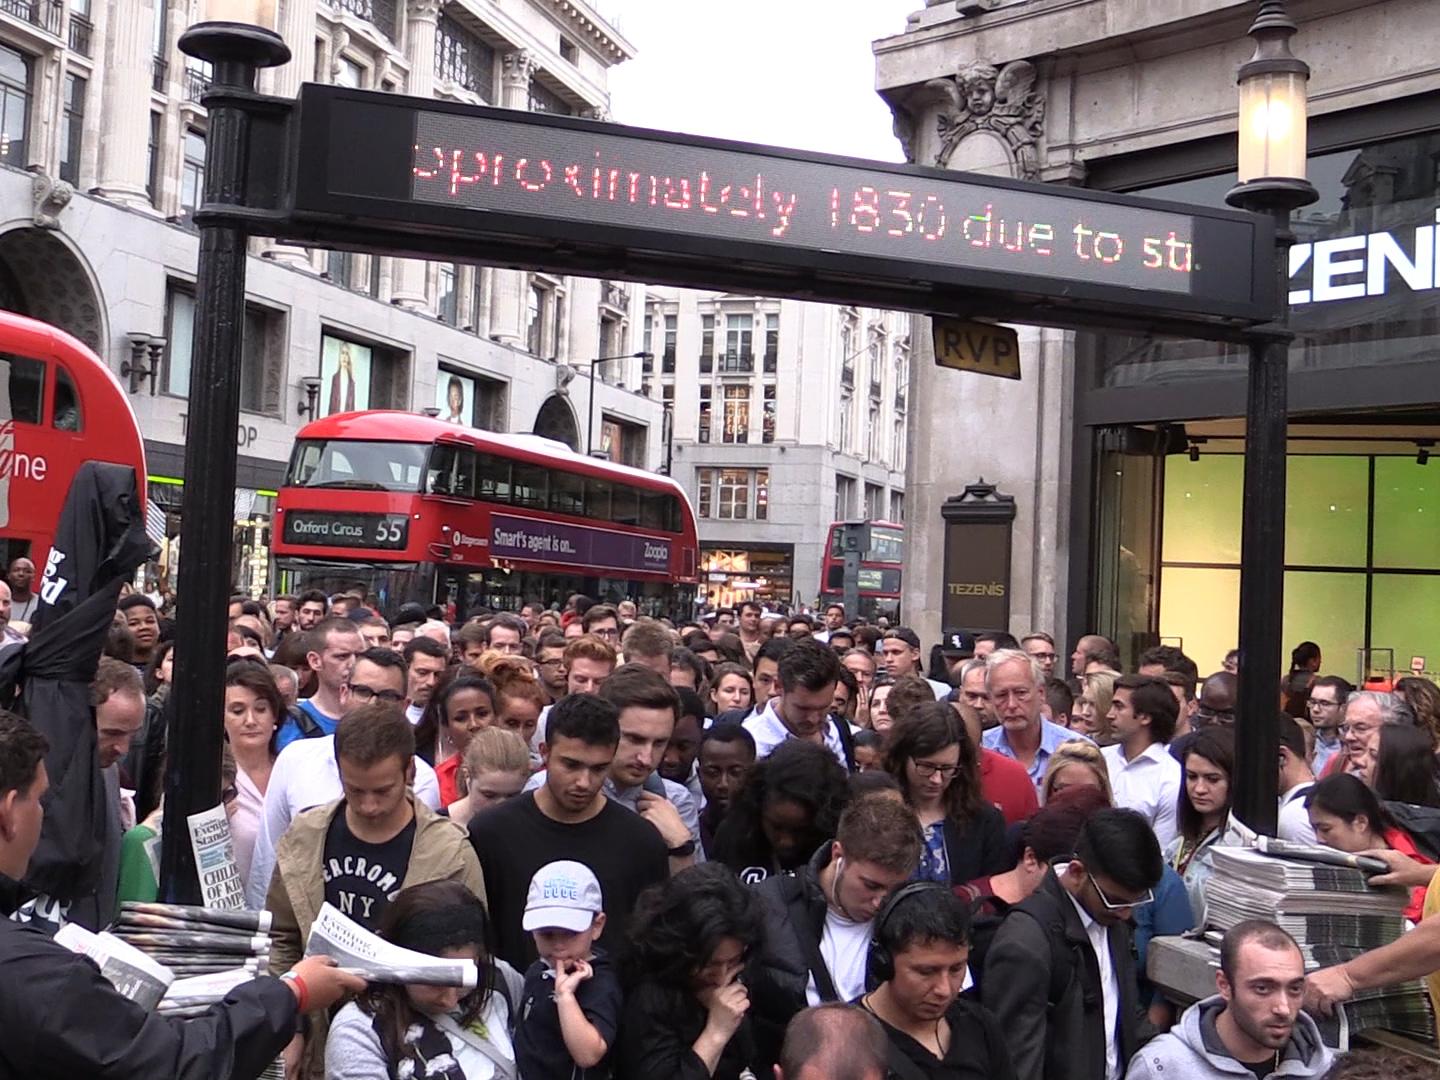 Oxford Circus comes to a standstill as overcrowding causes station to shut - just hours before the Tube strike began earlier this month